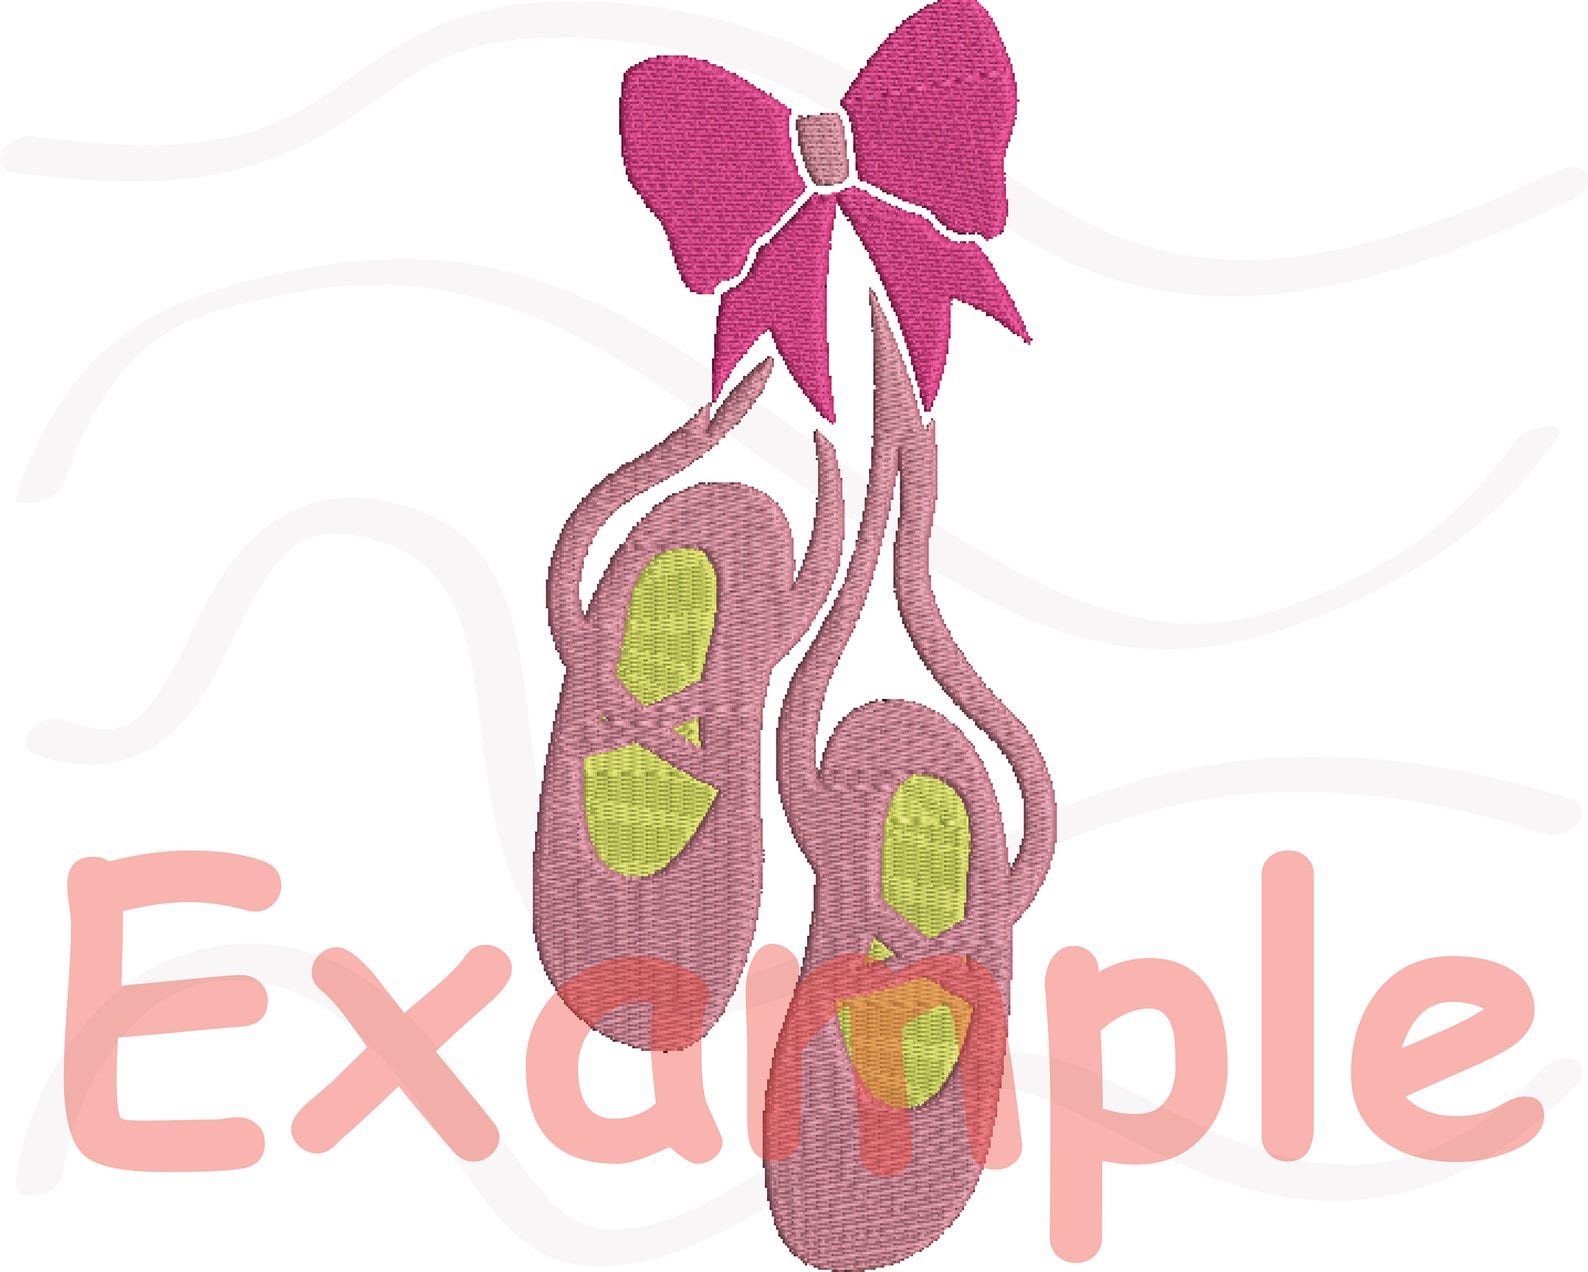 ballet shoes designs for embroidery machine instant download commercial use digital file 4x4 5x7 hoop icon symbol sign ballerina